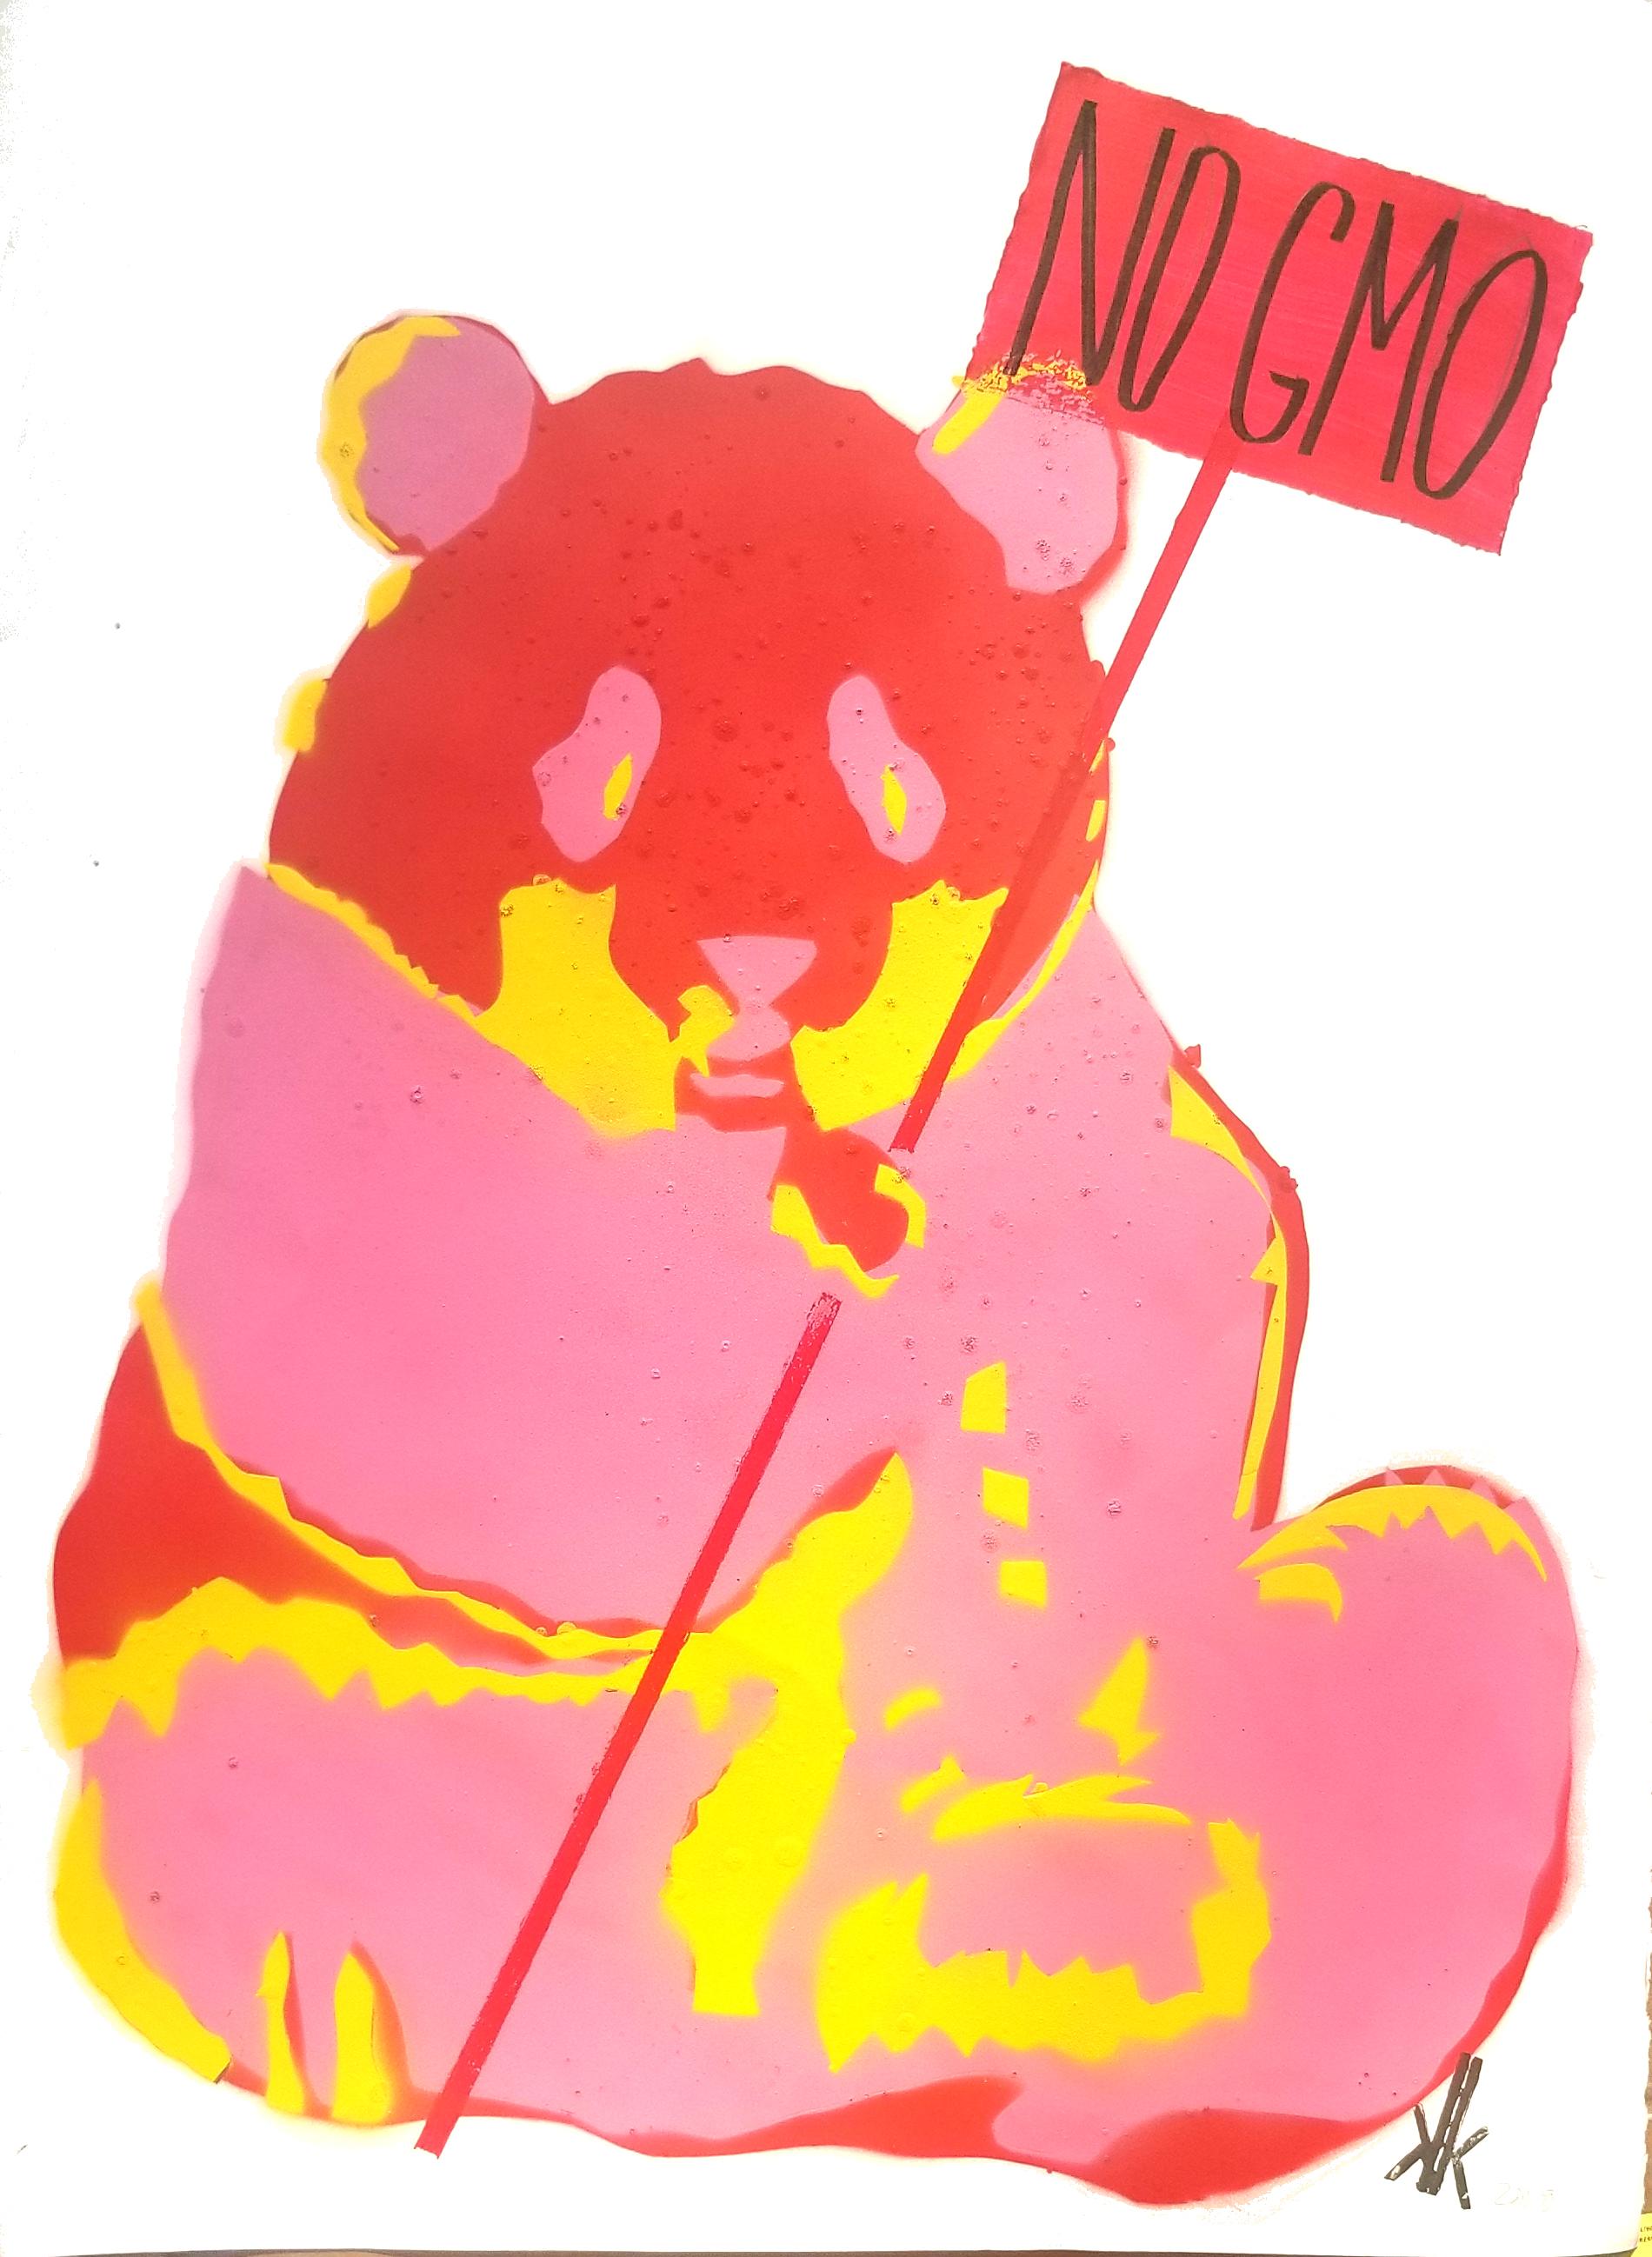 5 Layered Stencil : Red, Yellow, Green
Political Panda Bear hold a HARMONY sign
Showing other  Bears in Series 
Unique pieces
This is on 90lb Paper color: Natural

New York Artist; K.K.
comes rolled in a tube. Can be matted or floated in frame..